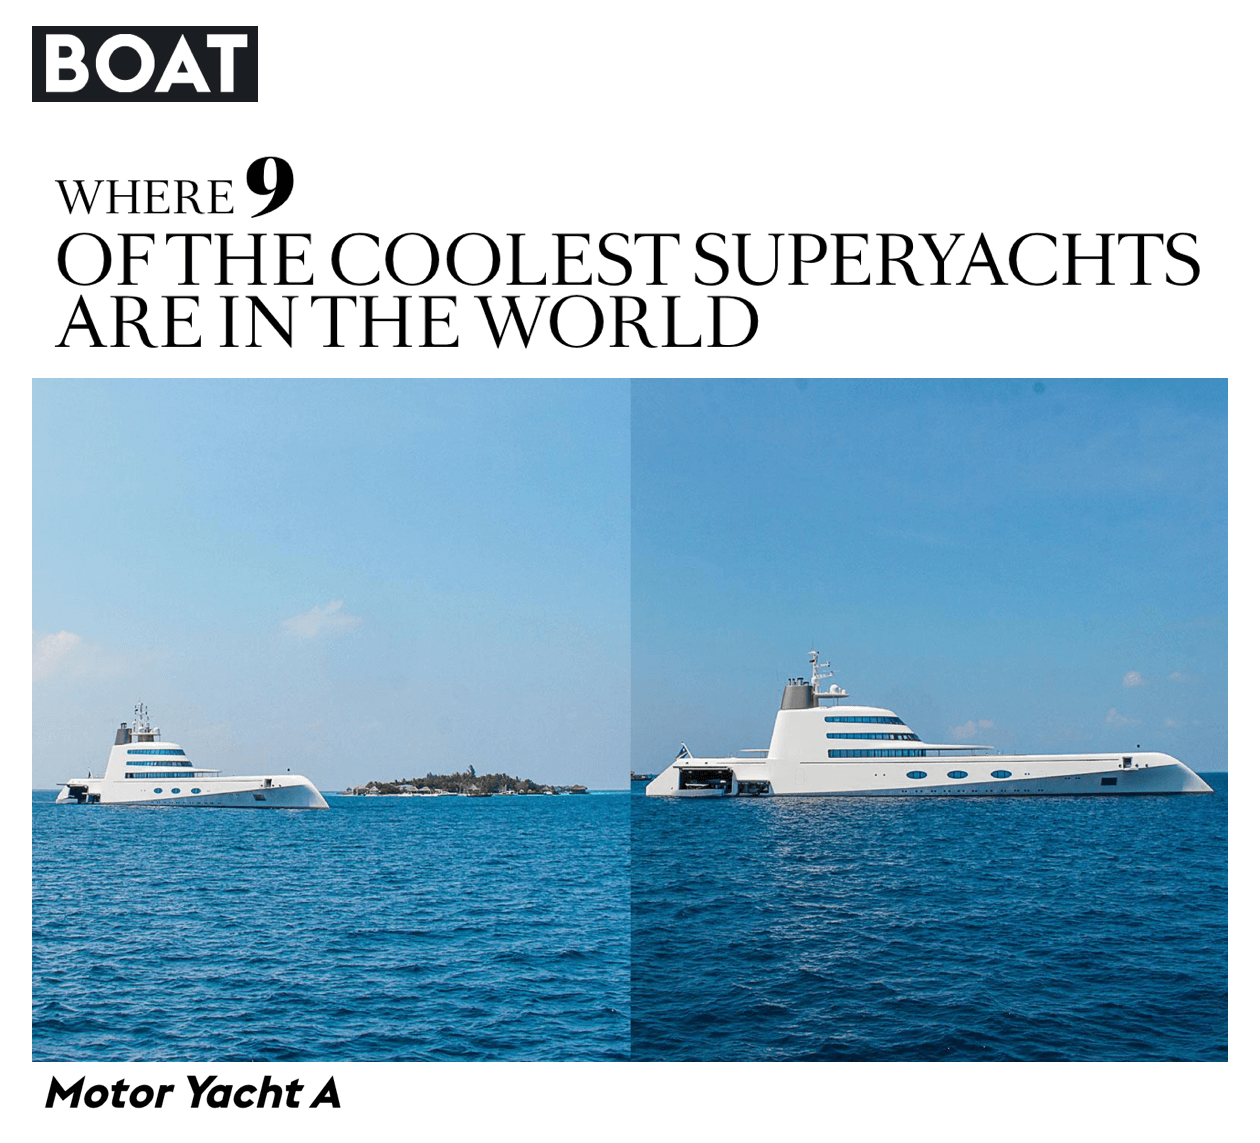 Where 9 of the coolest superyachts are in the world